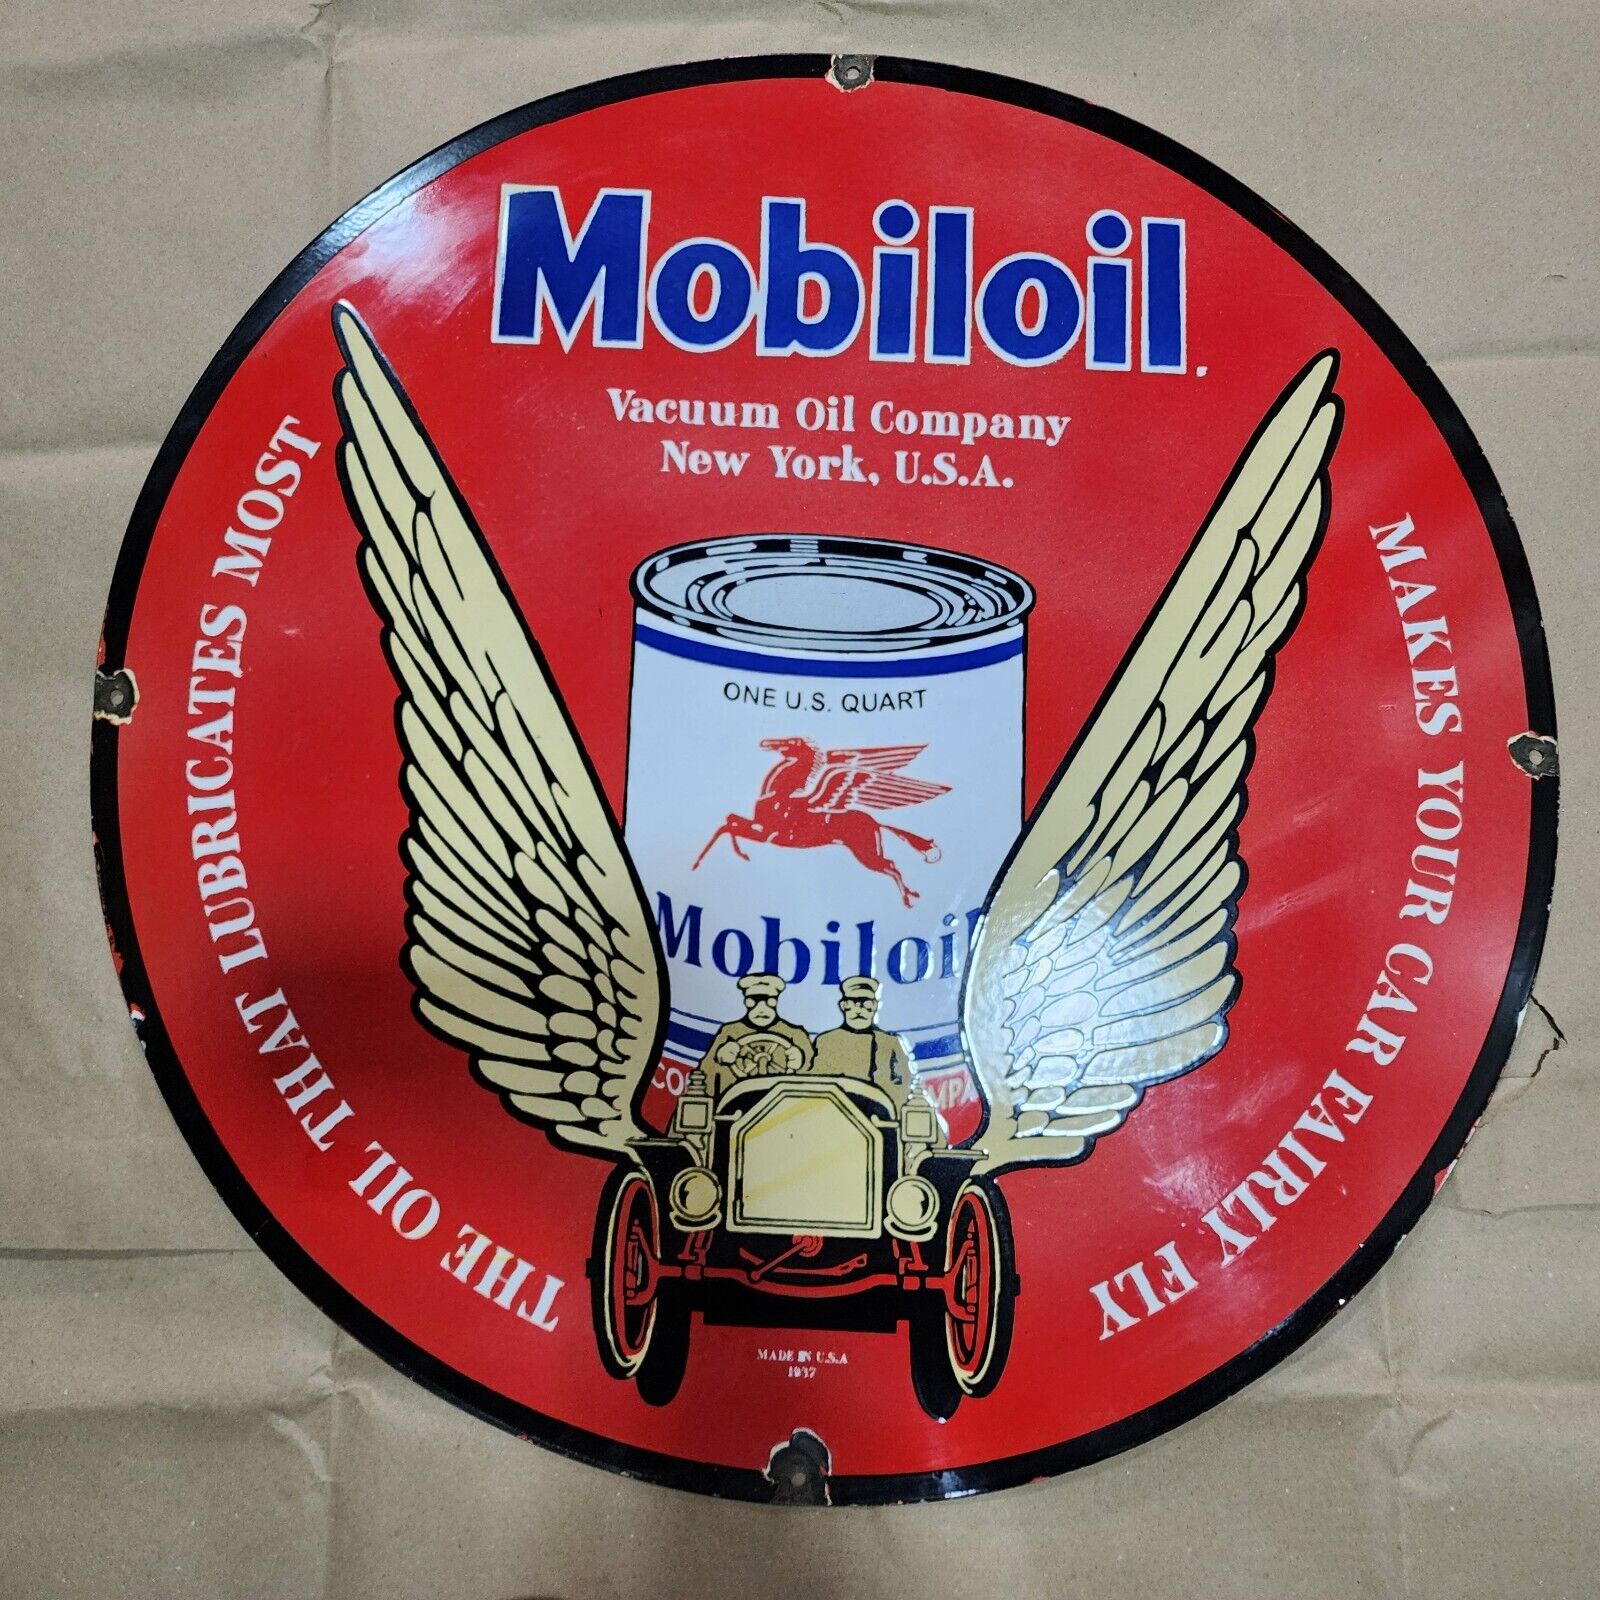 MOBIL OIL WINGS PORCELAIN ENAMEL SIGN 30 INCHES ROUND